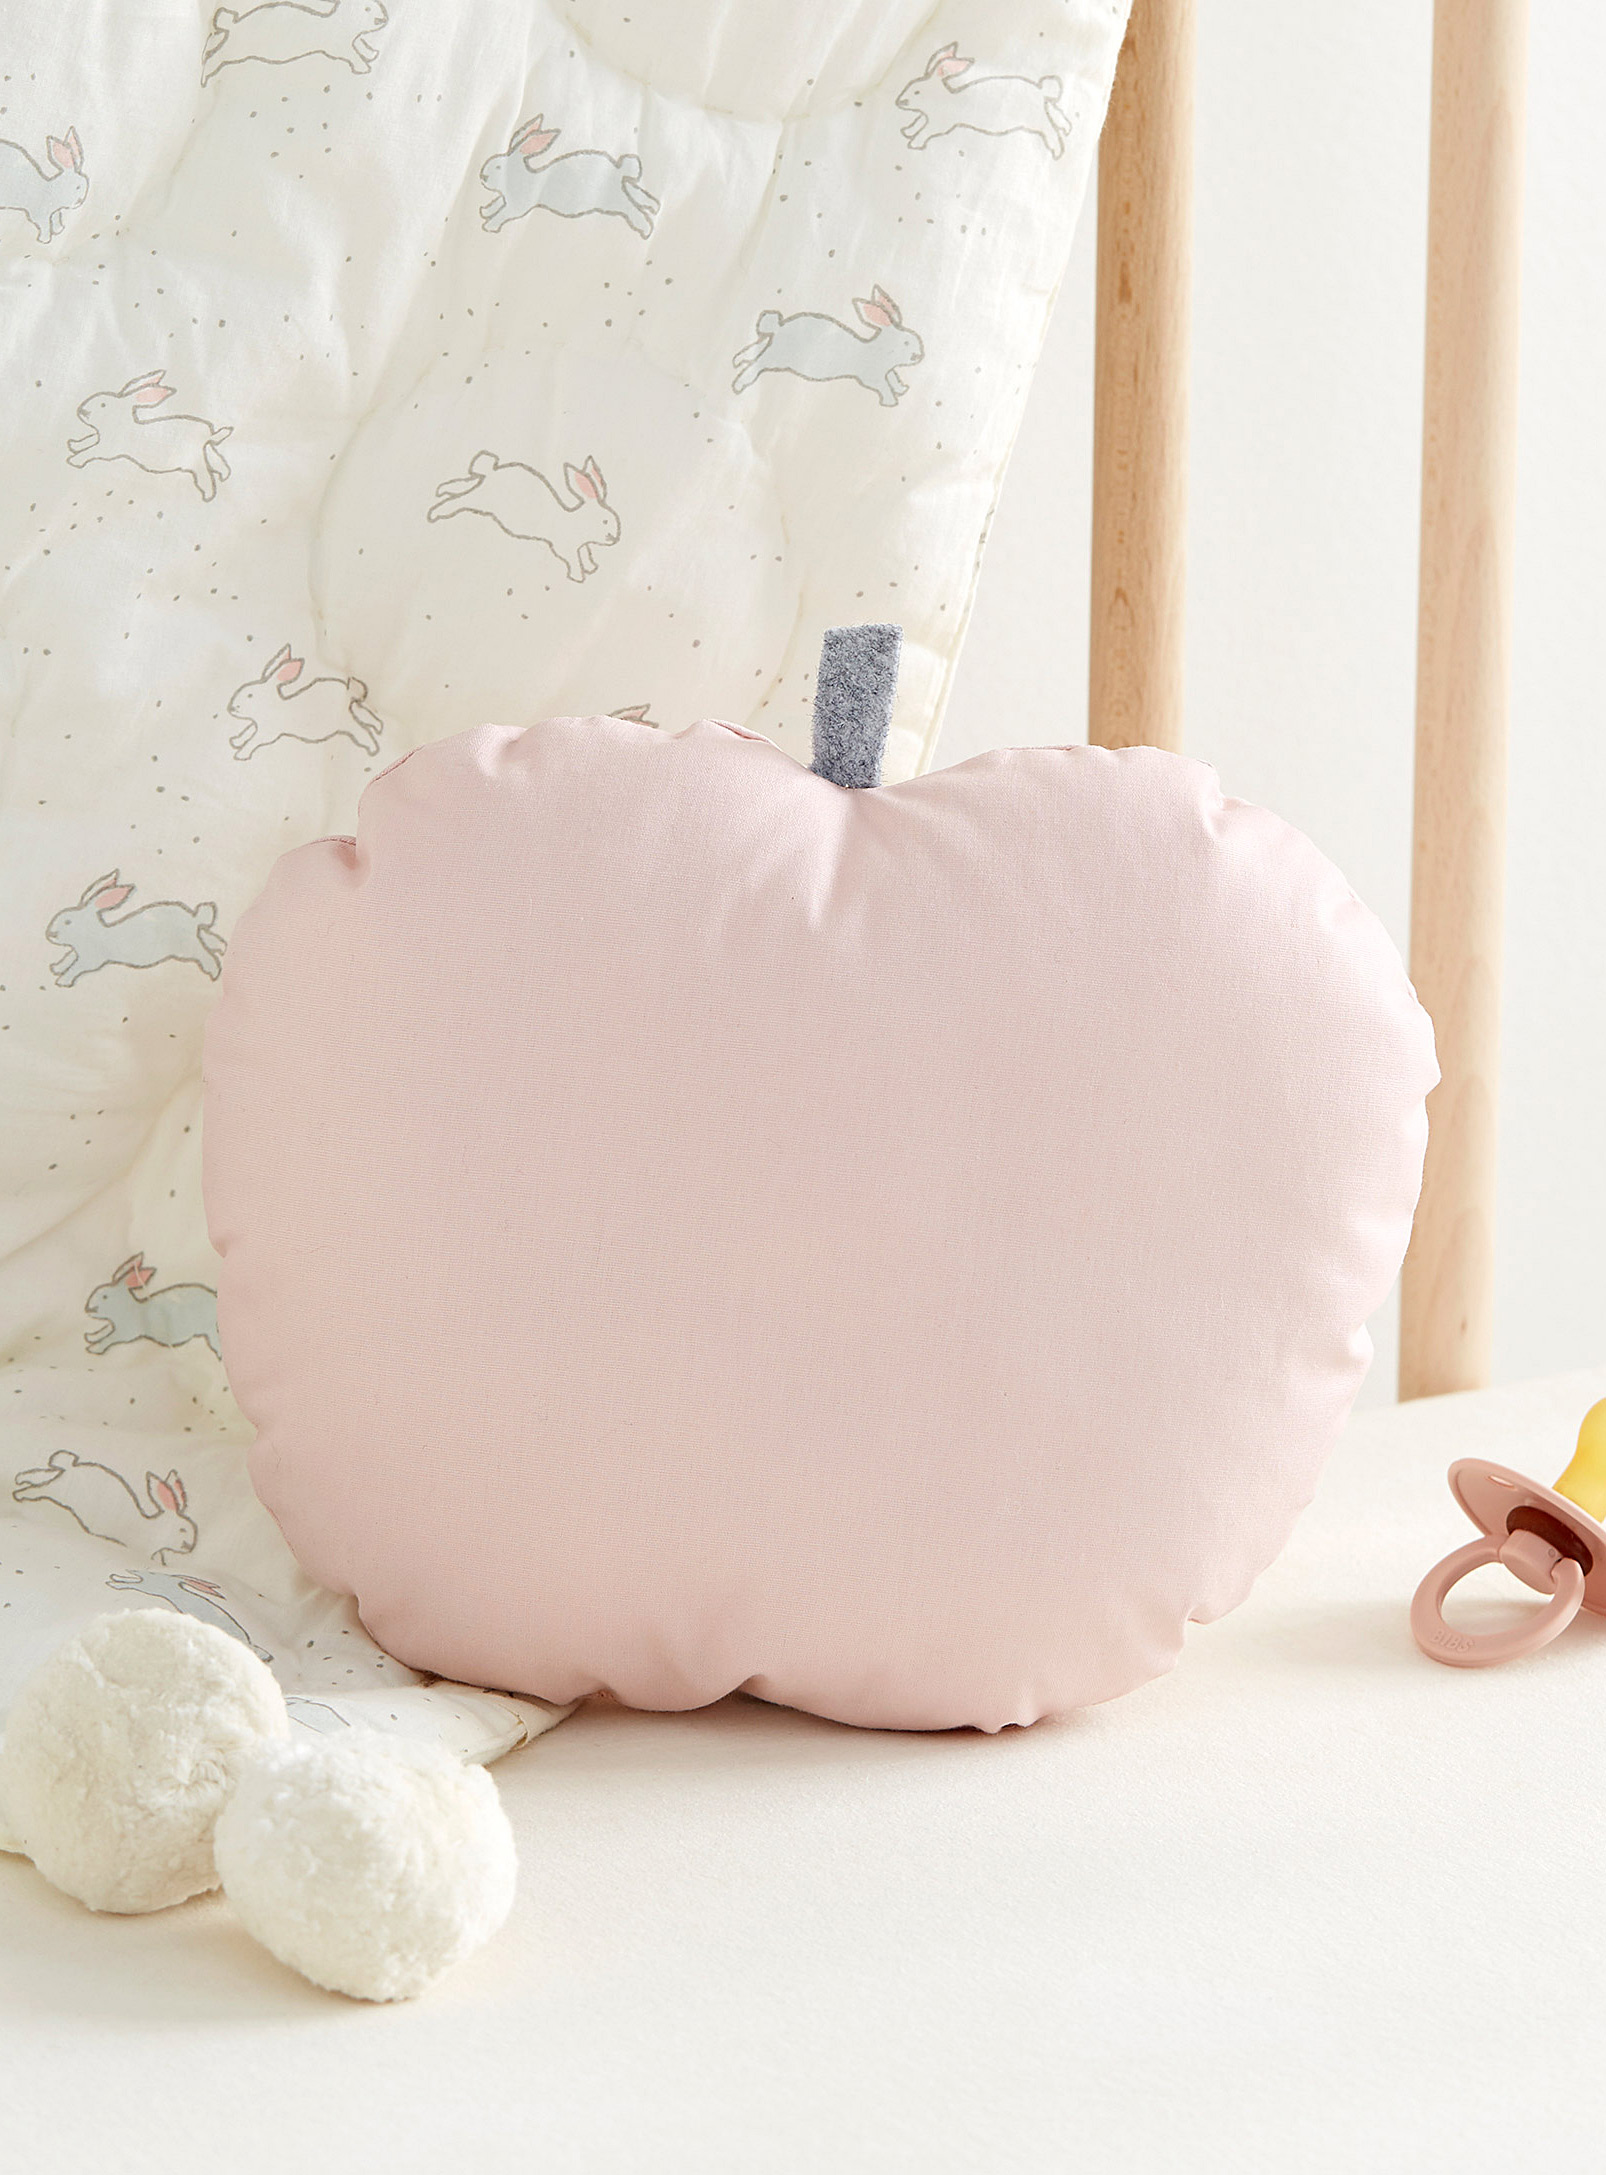 The Butter Flying - Small pink apple cushion 23 cm in diameter